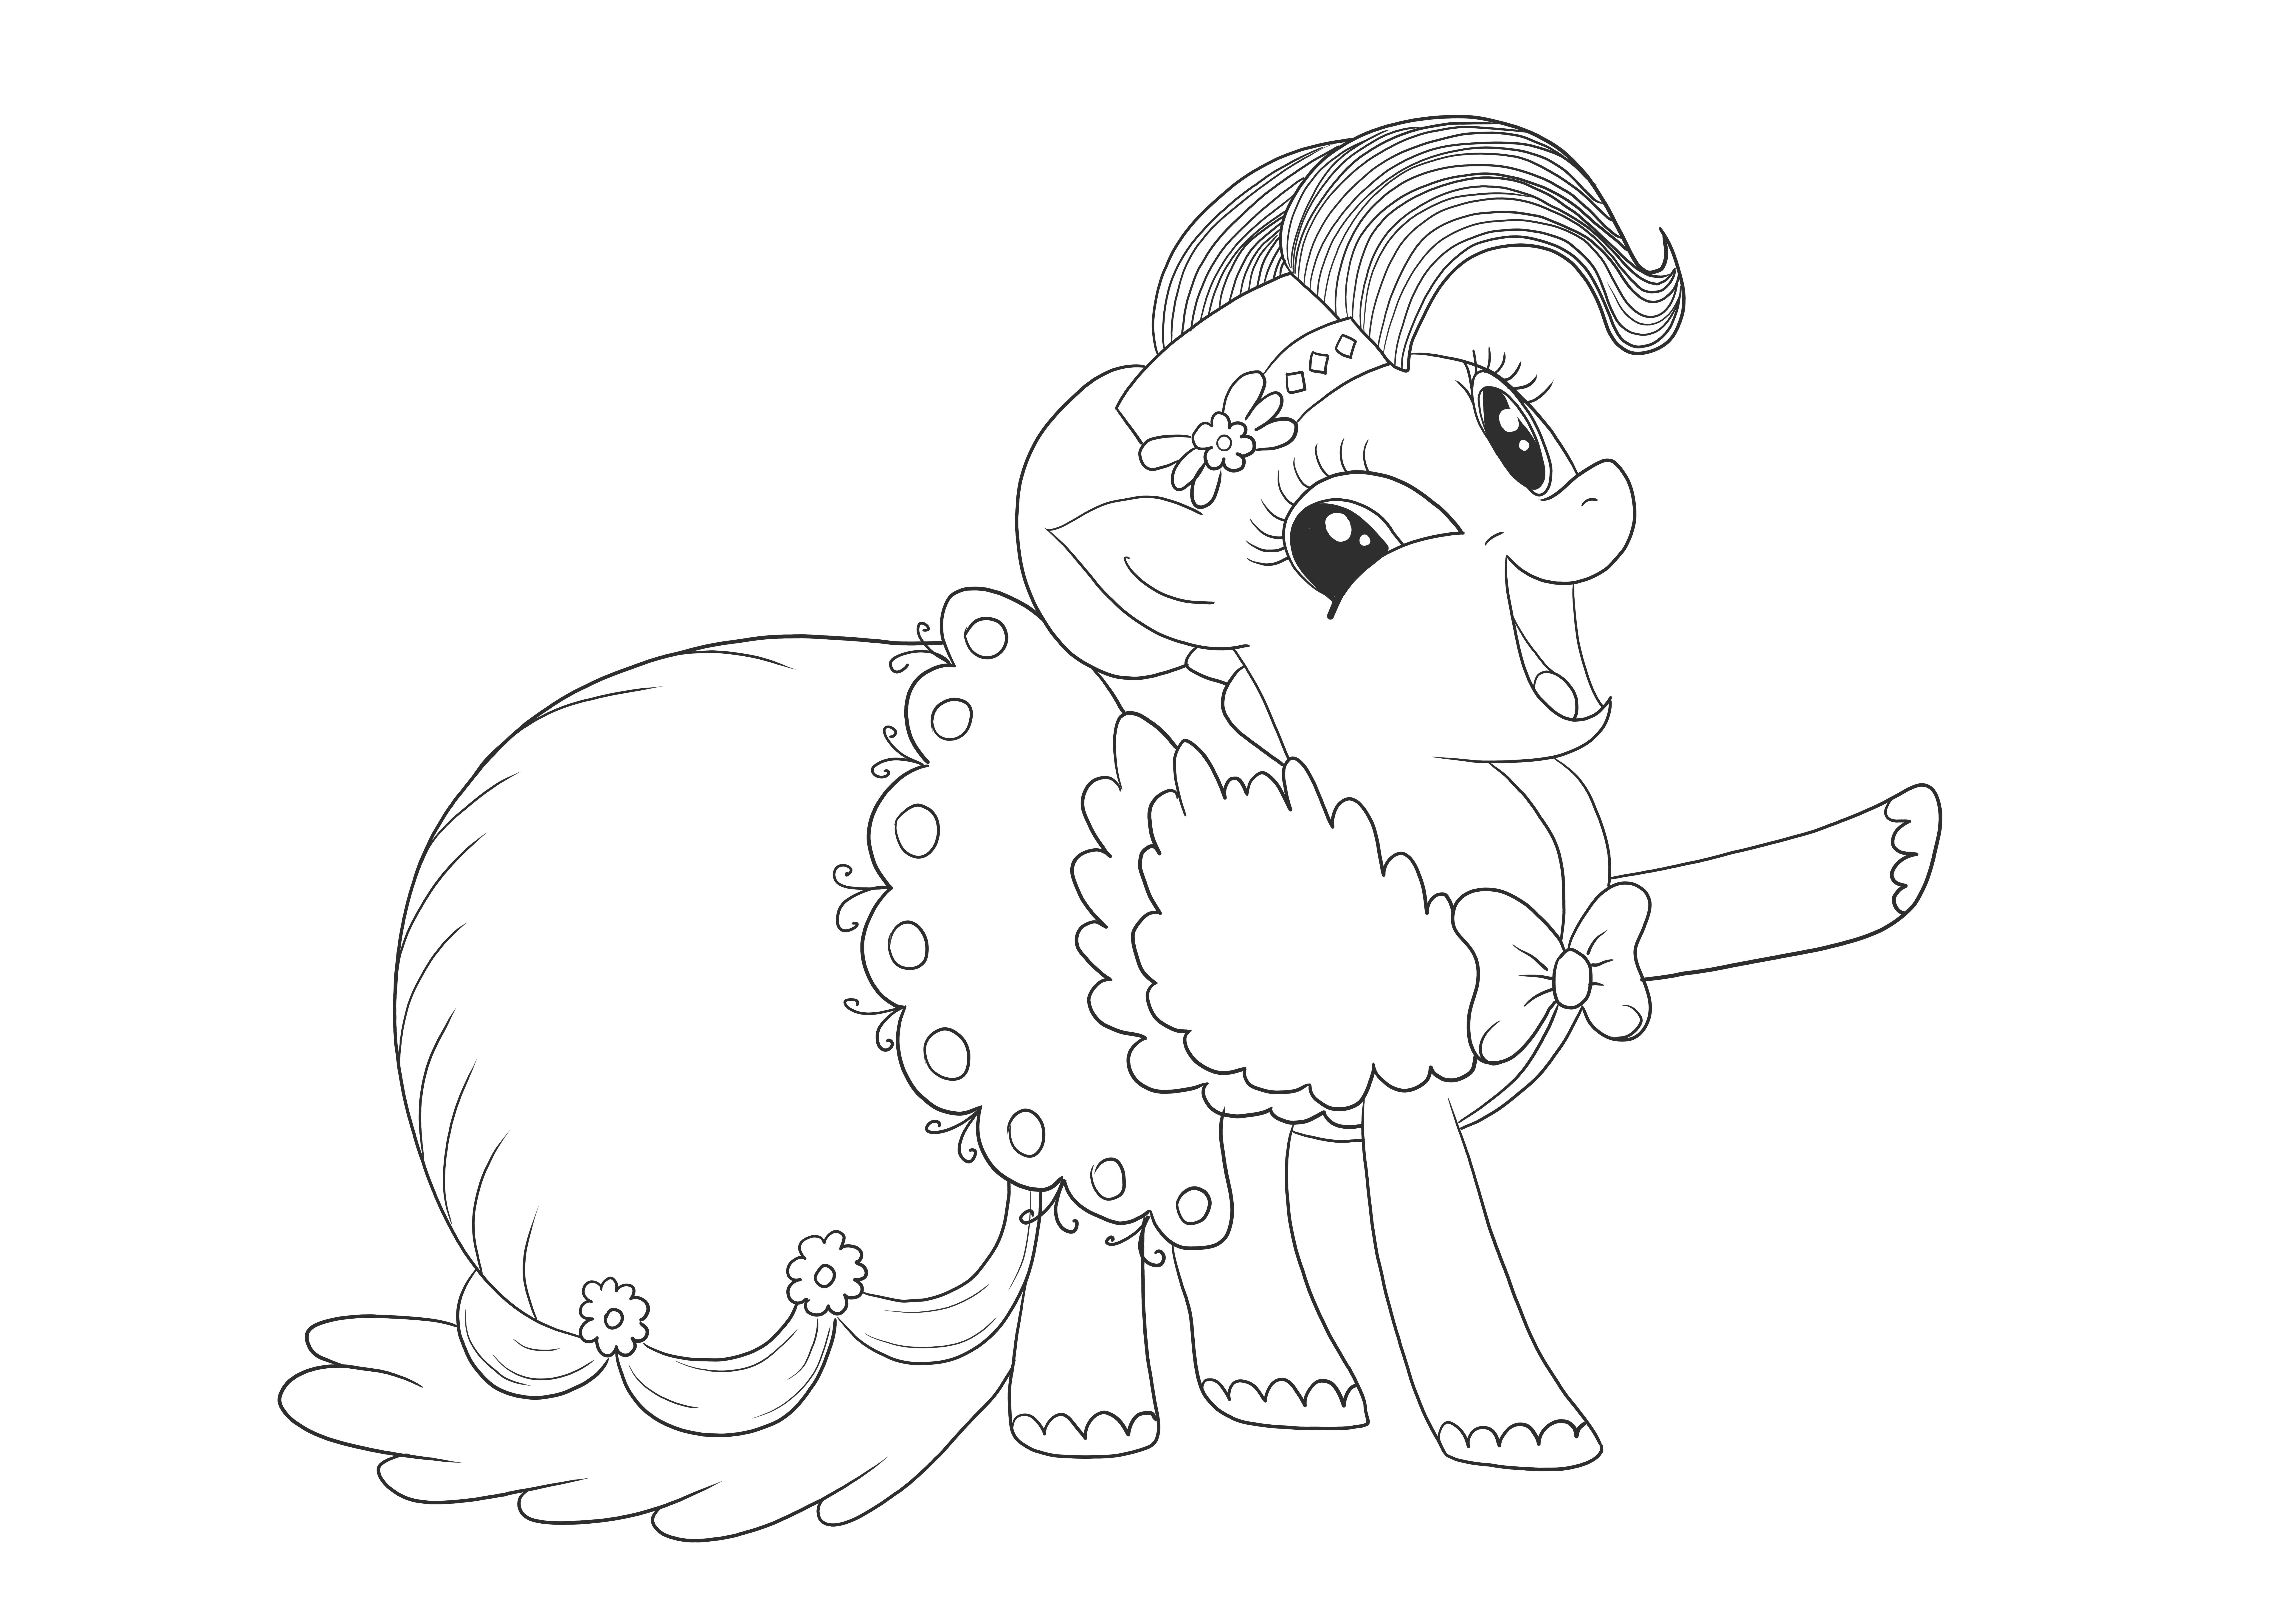 My Little Pony Pinkie Pie easy and simple coloring sheet free to print